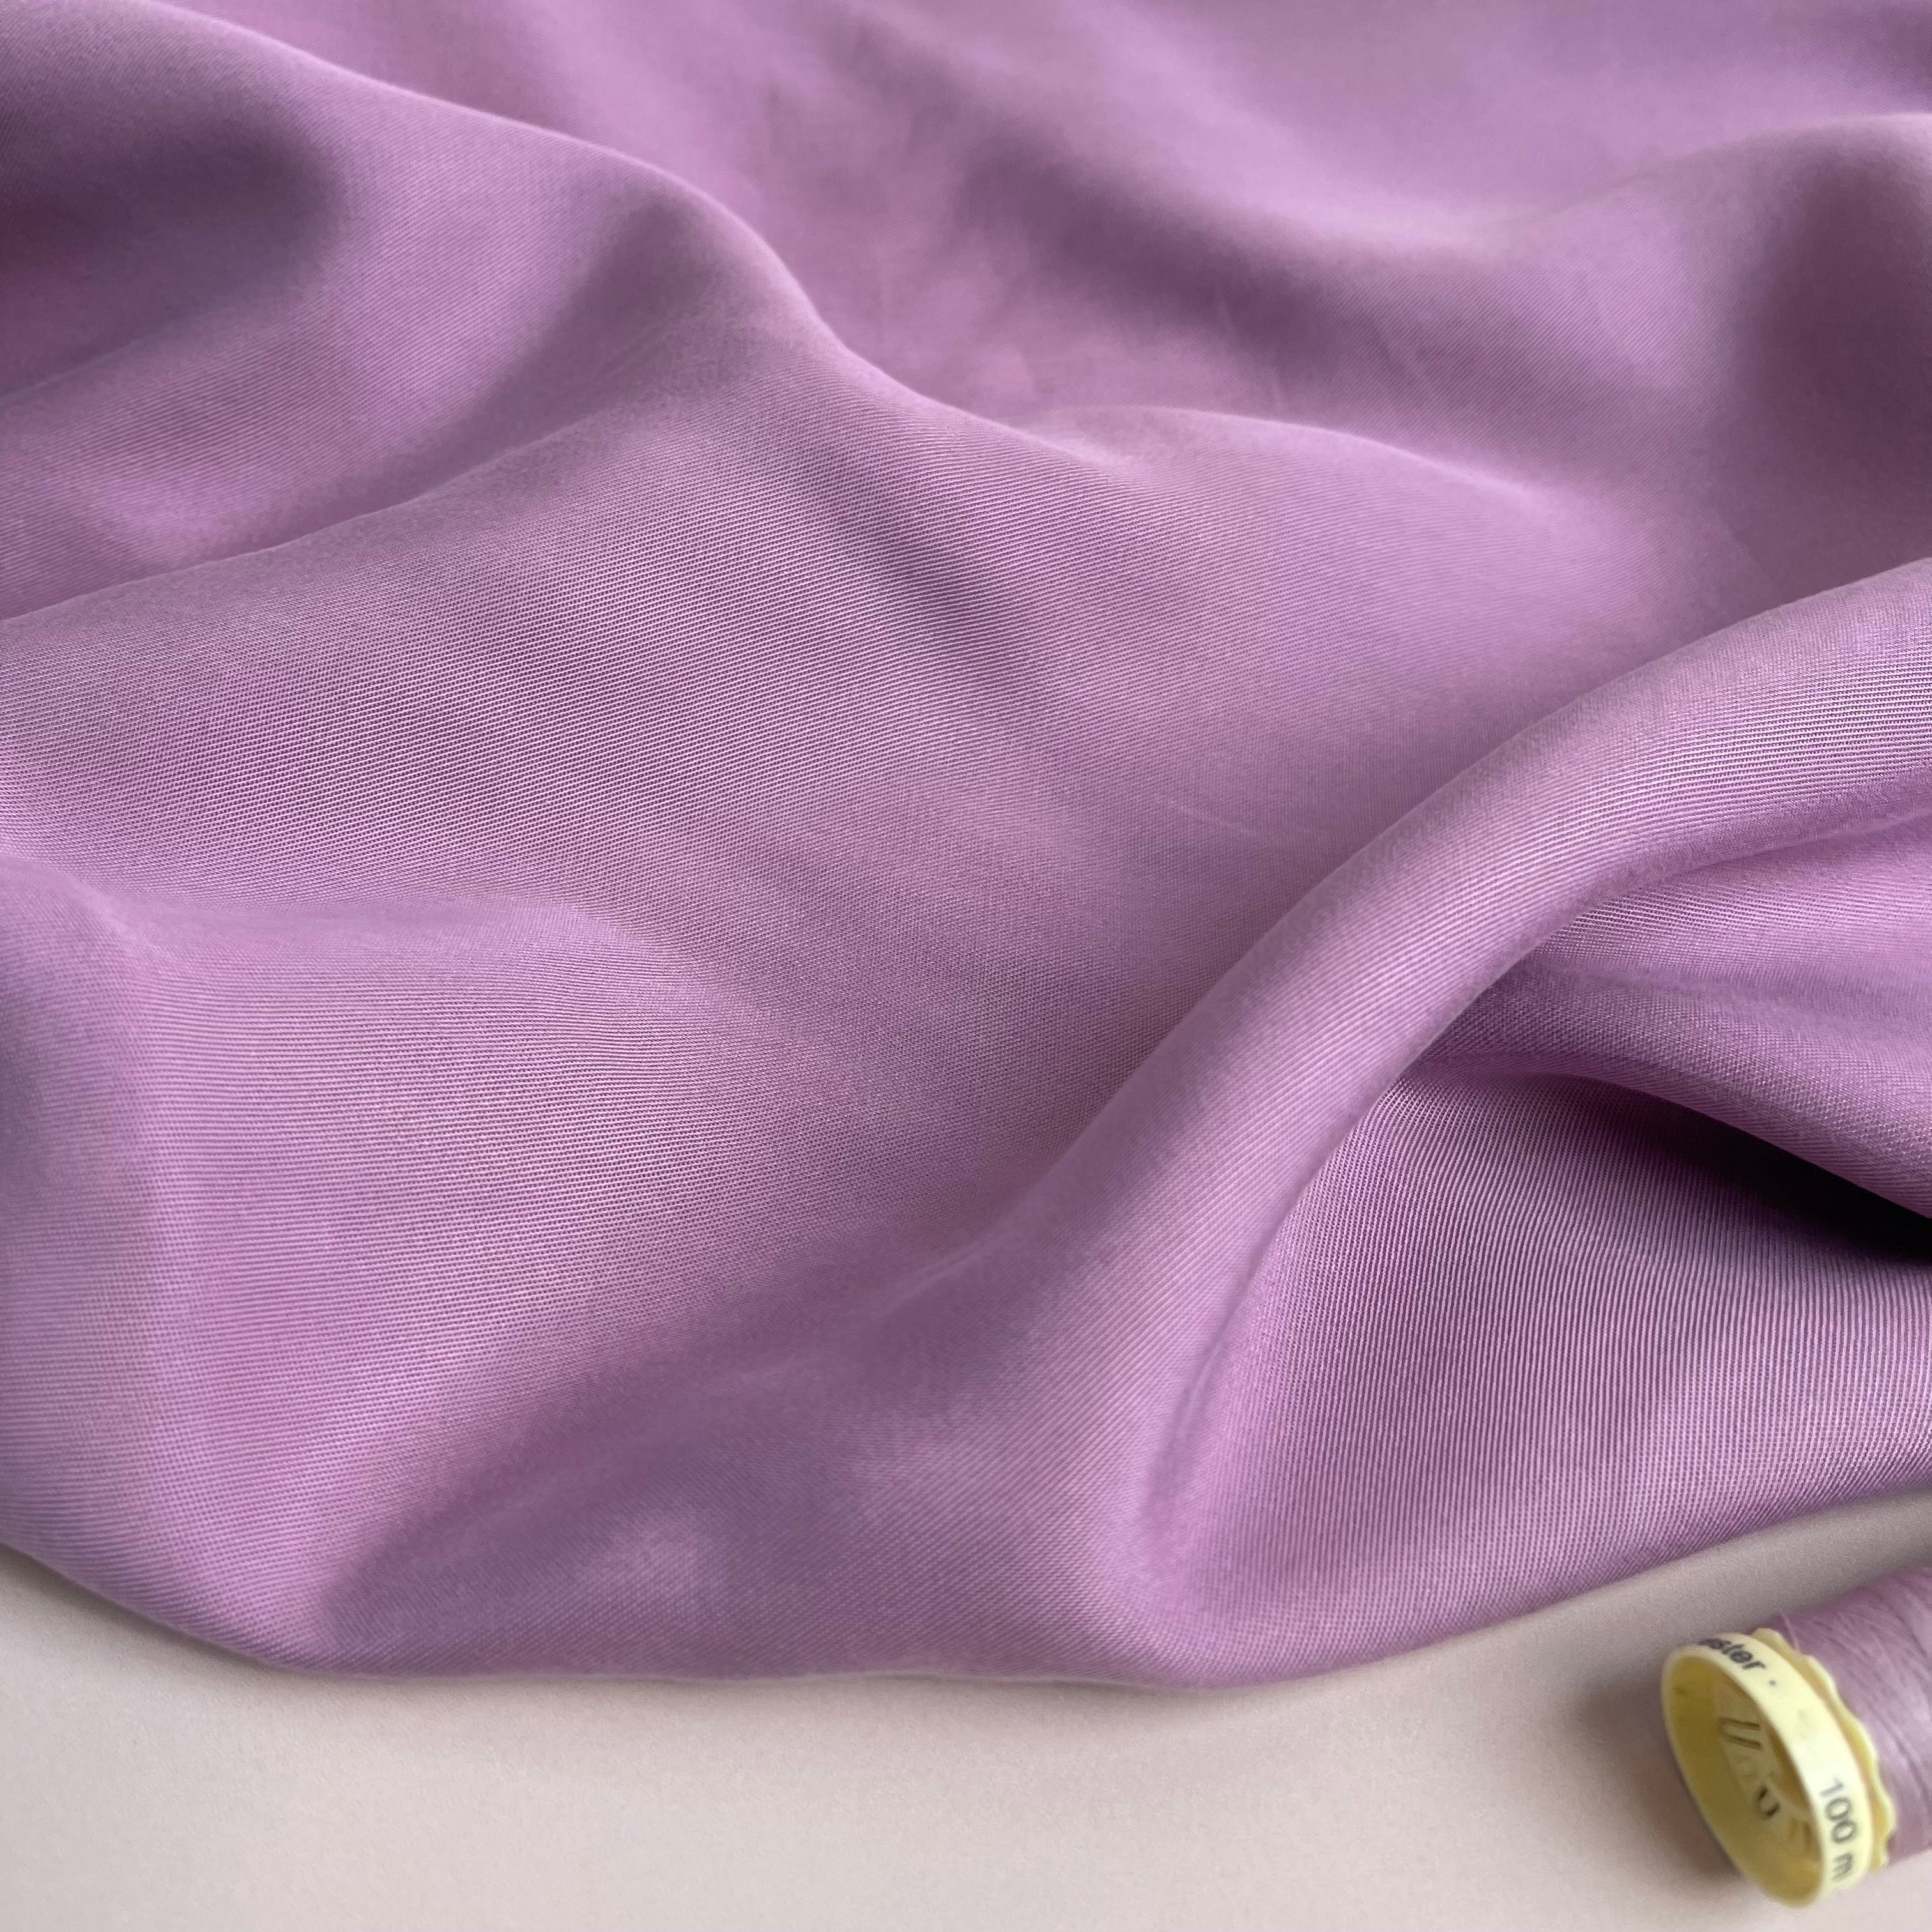 REMNANT 0.61 Metre - Lush Sandwashed Lyocell Twill in Lilac